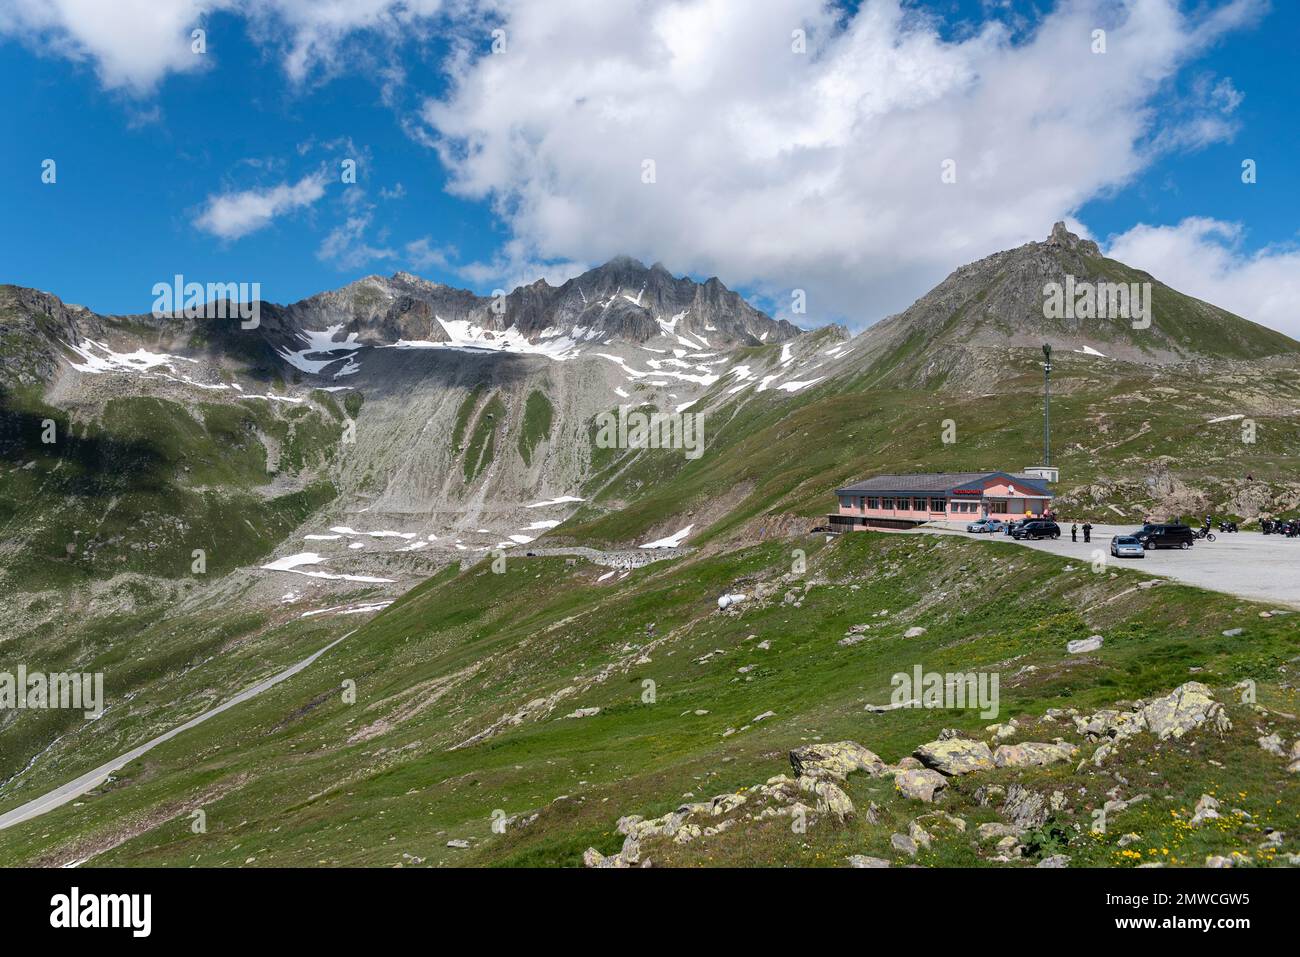 Alpine panorama near the Nufenen Pass with the mountains Pizzo Gallina and Chilchhorn, Ulrichen, Valais, Switzerland Stock Photo